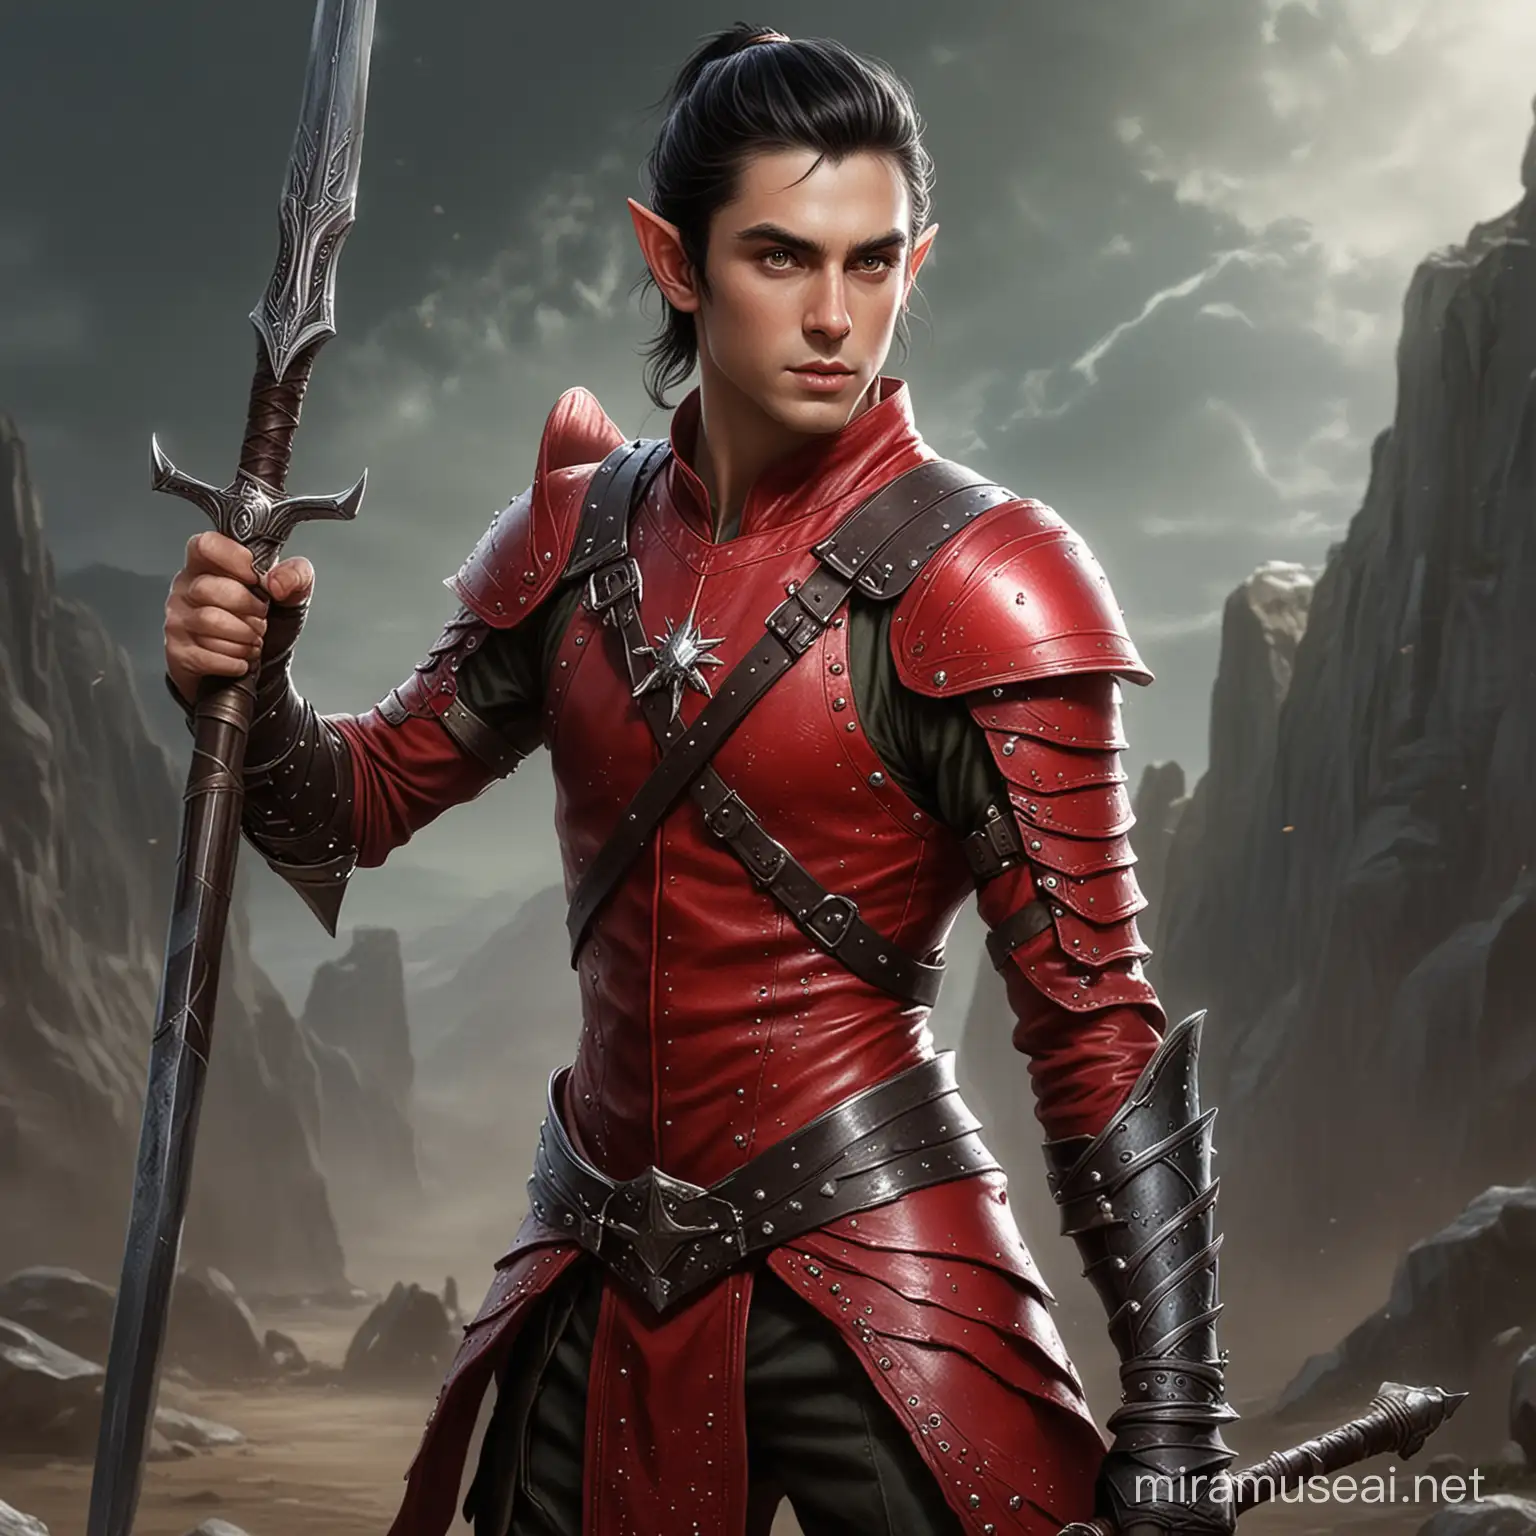 Stylish Elf Warrior with Dual Saber Spears in Red Leather Armor